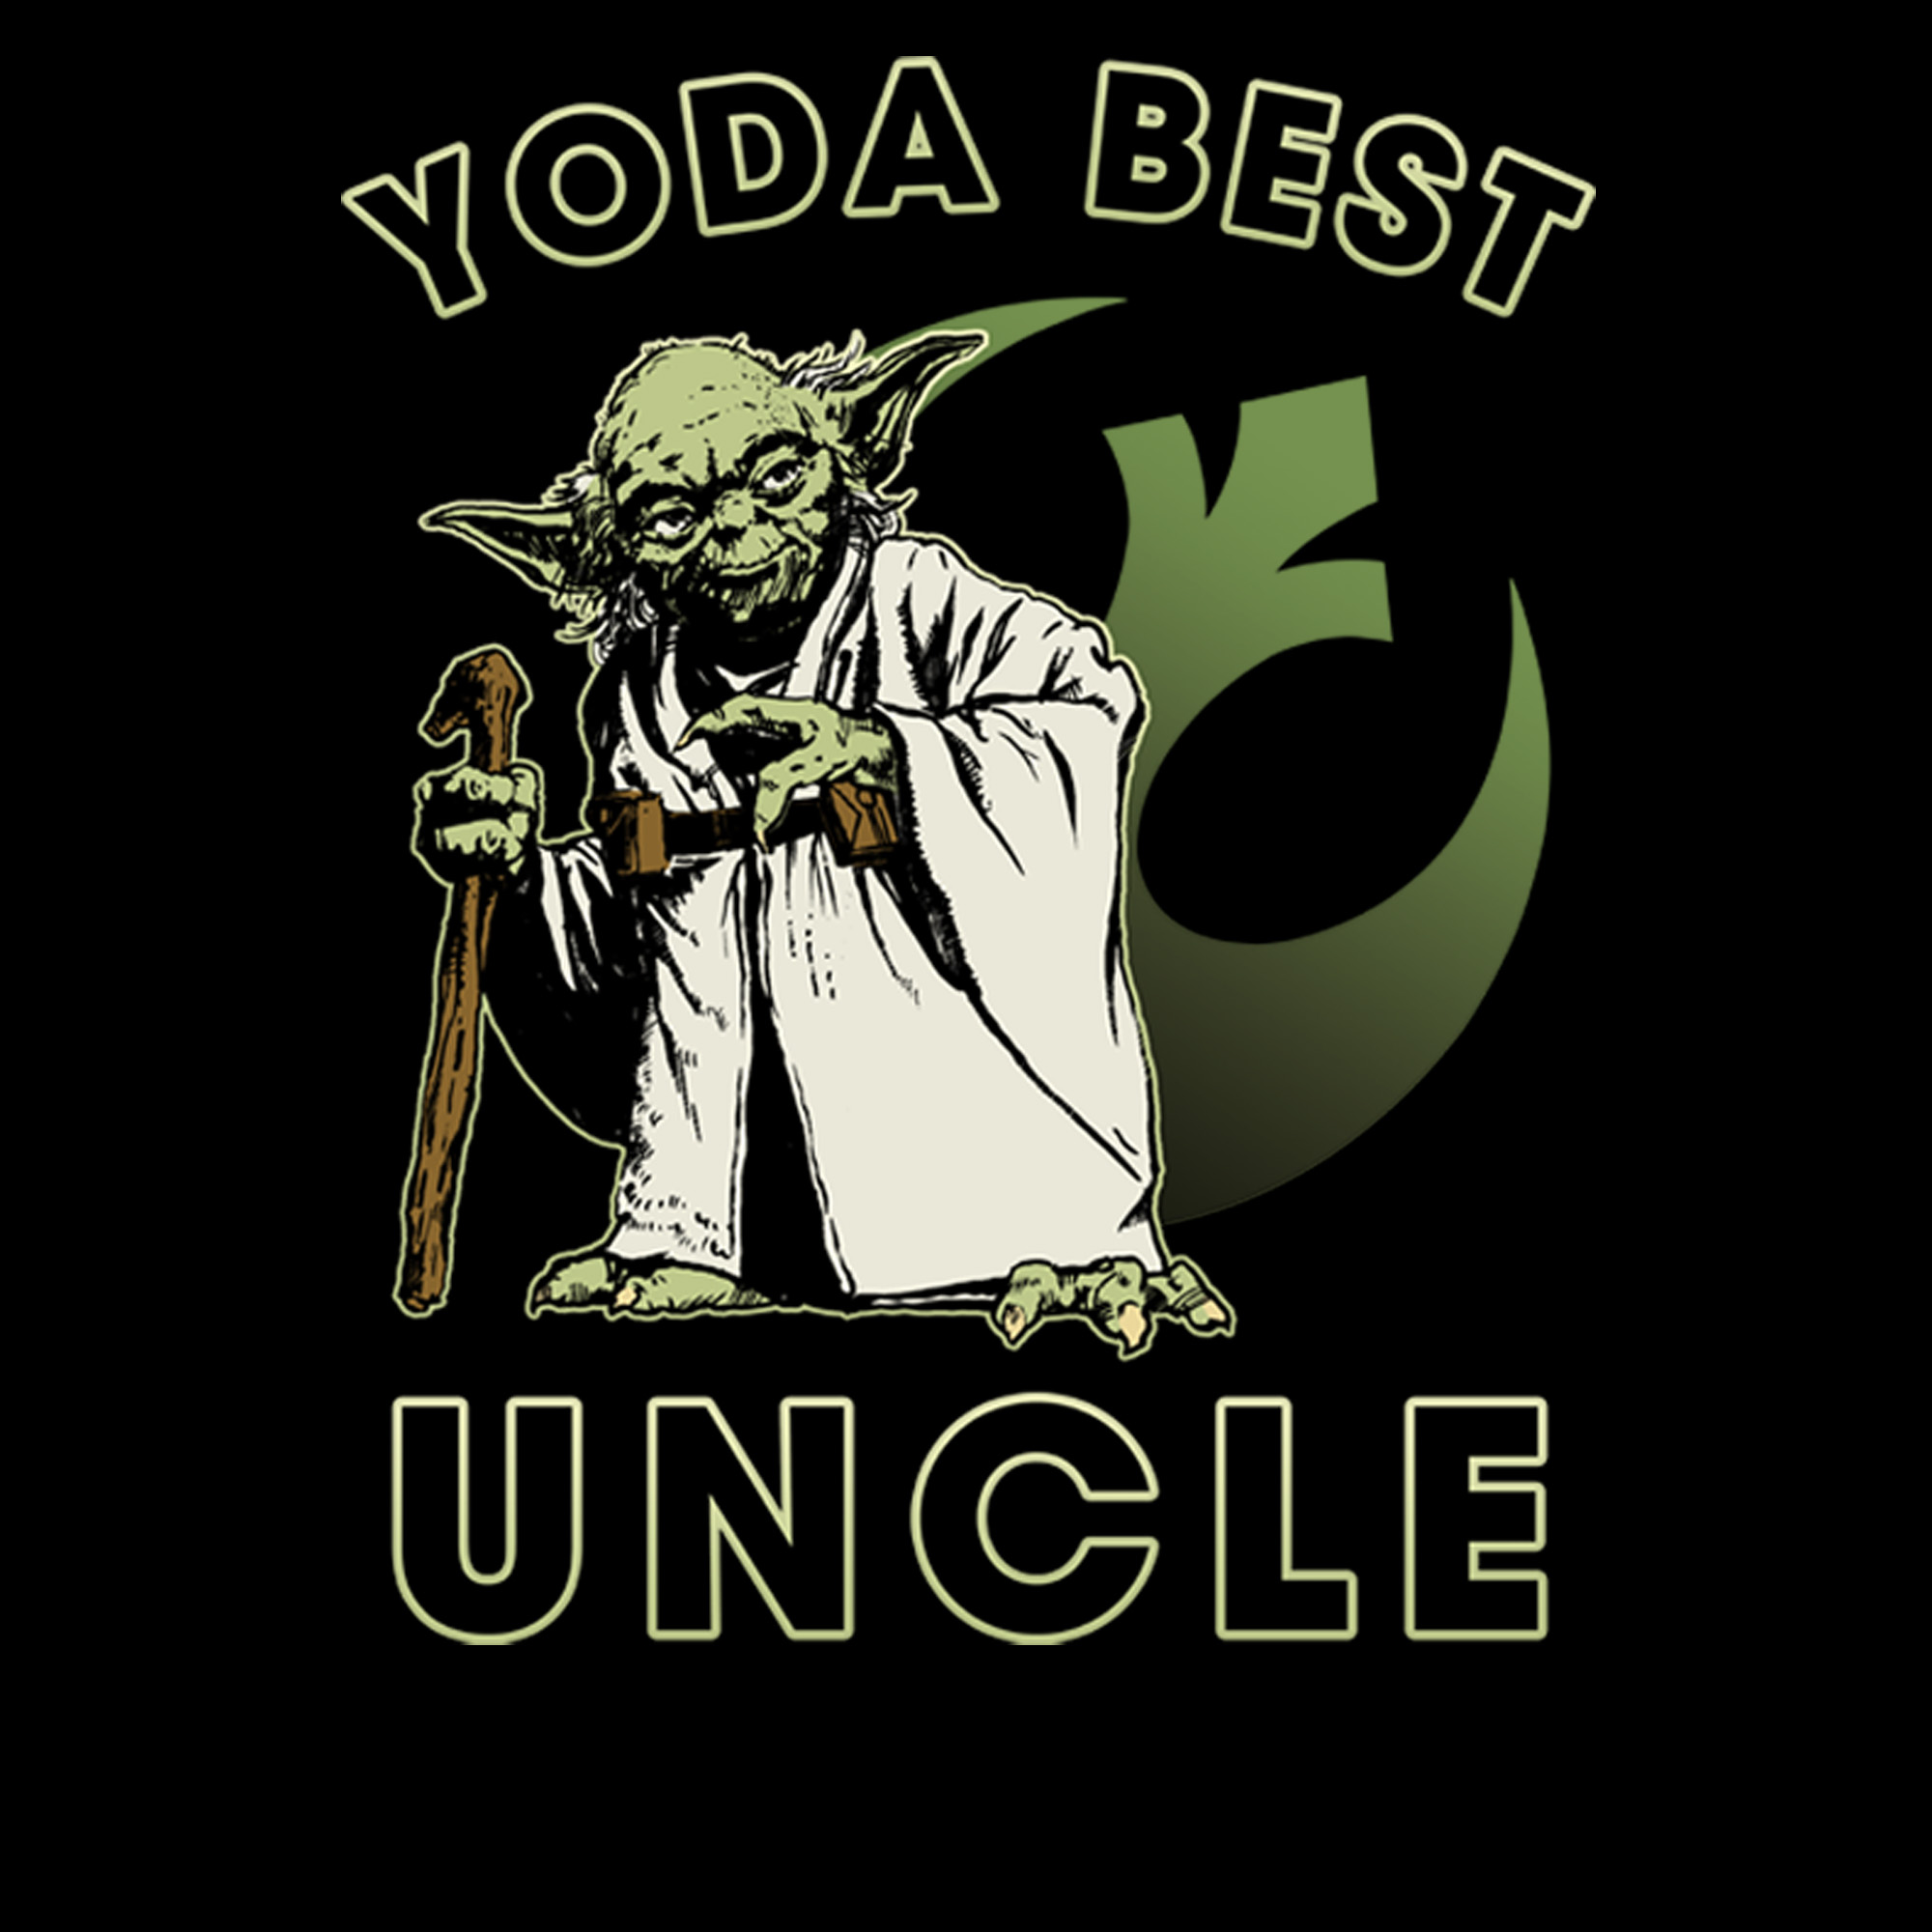 Men's Star Wars Yoda Best Uncle  Graphic Tee Black Large - image 2 of 5